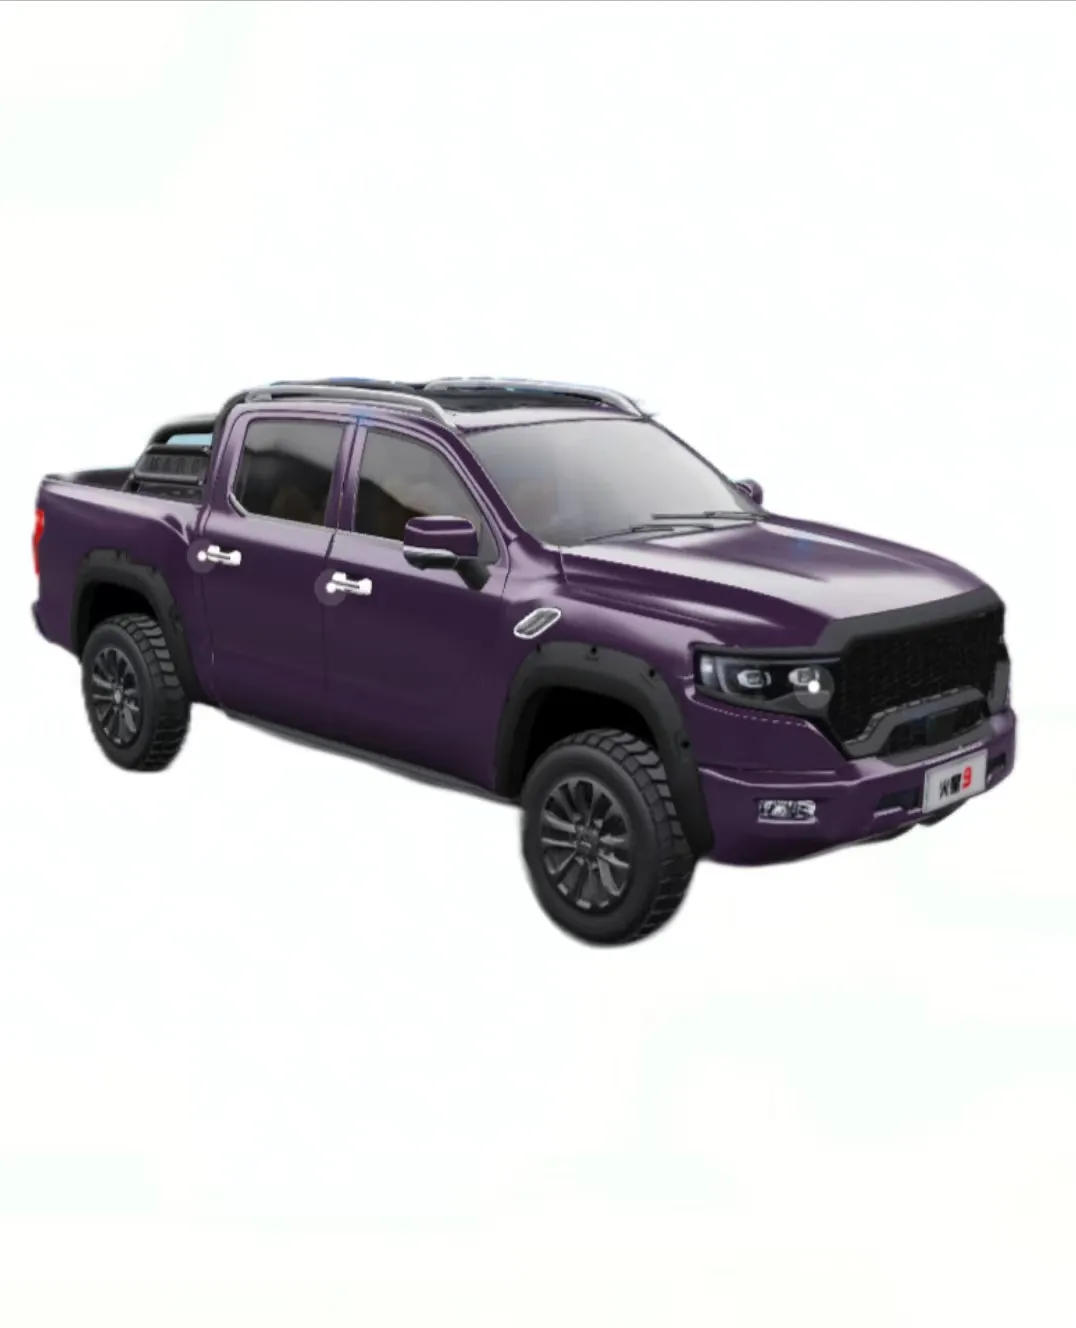 The best price, powerful four-wheel drive system pickup truck all-terrain mud sand snow driving can be satisfied